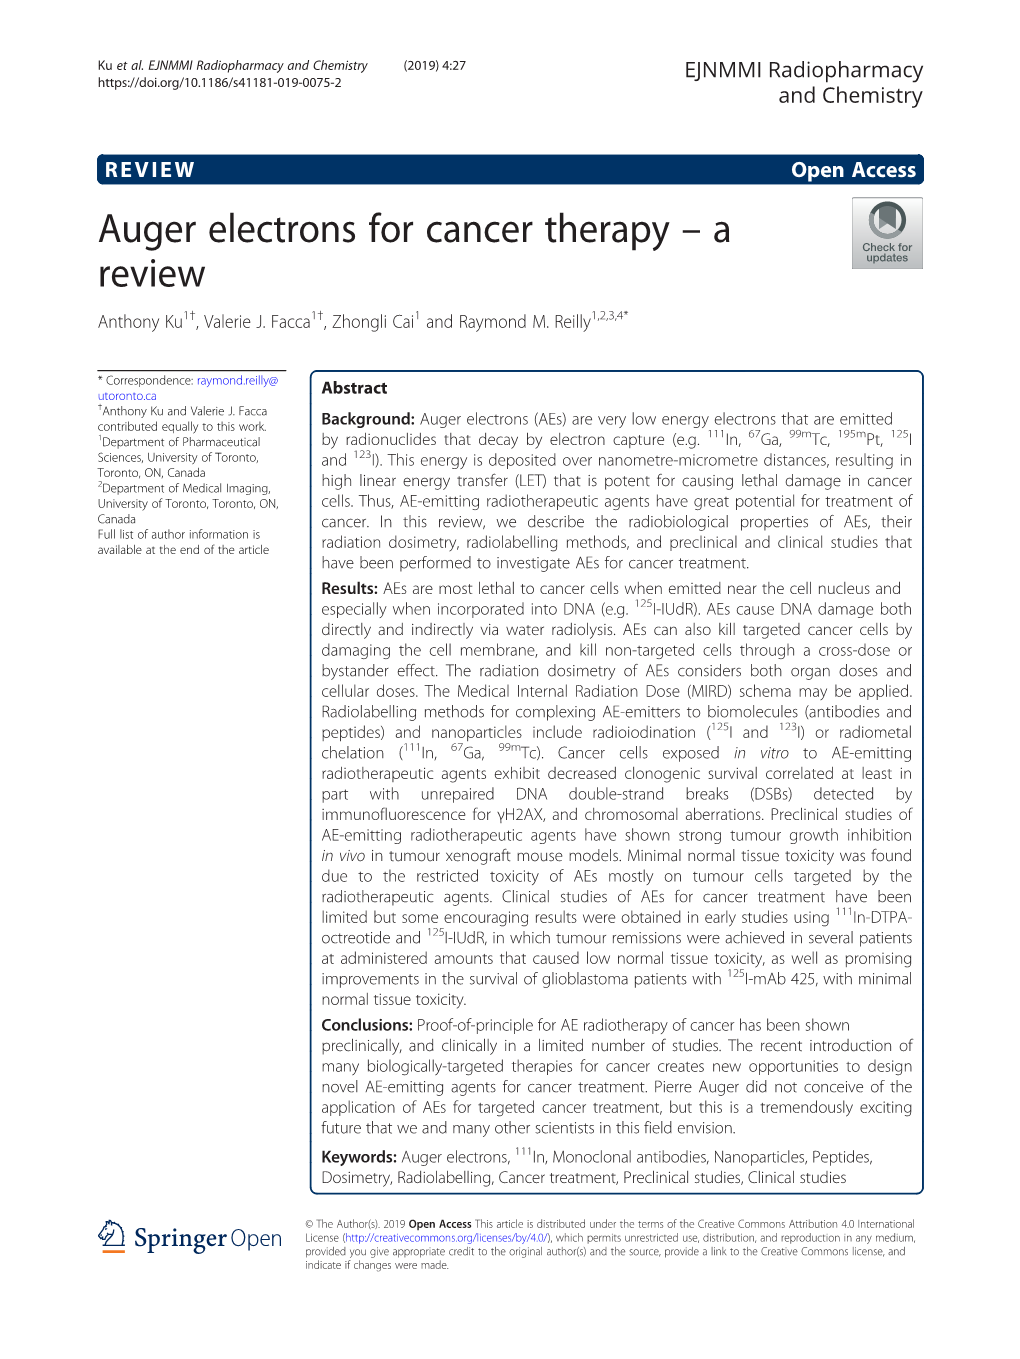 Auger Electrons for Cancer Therapy – a Review Anthony Ku1†, Valerie J